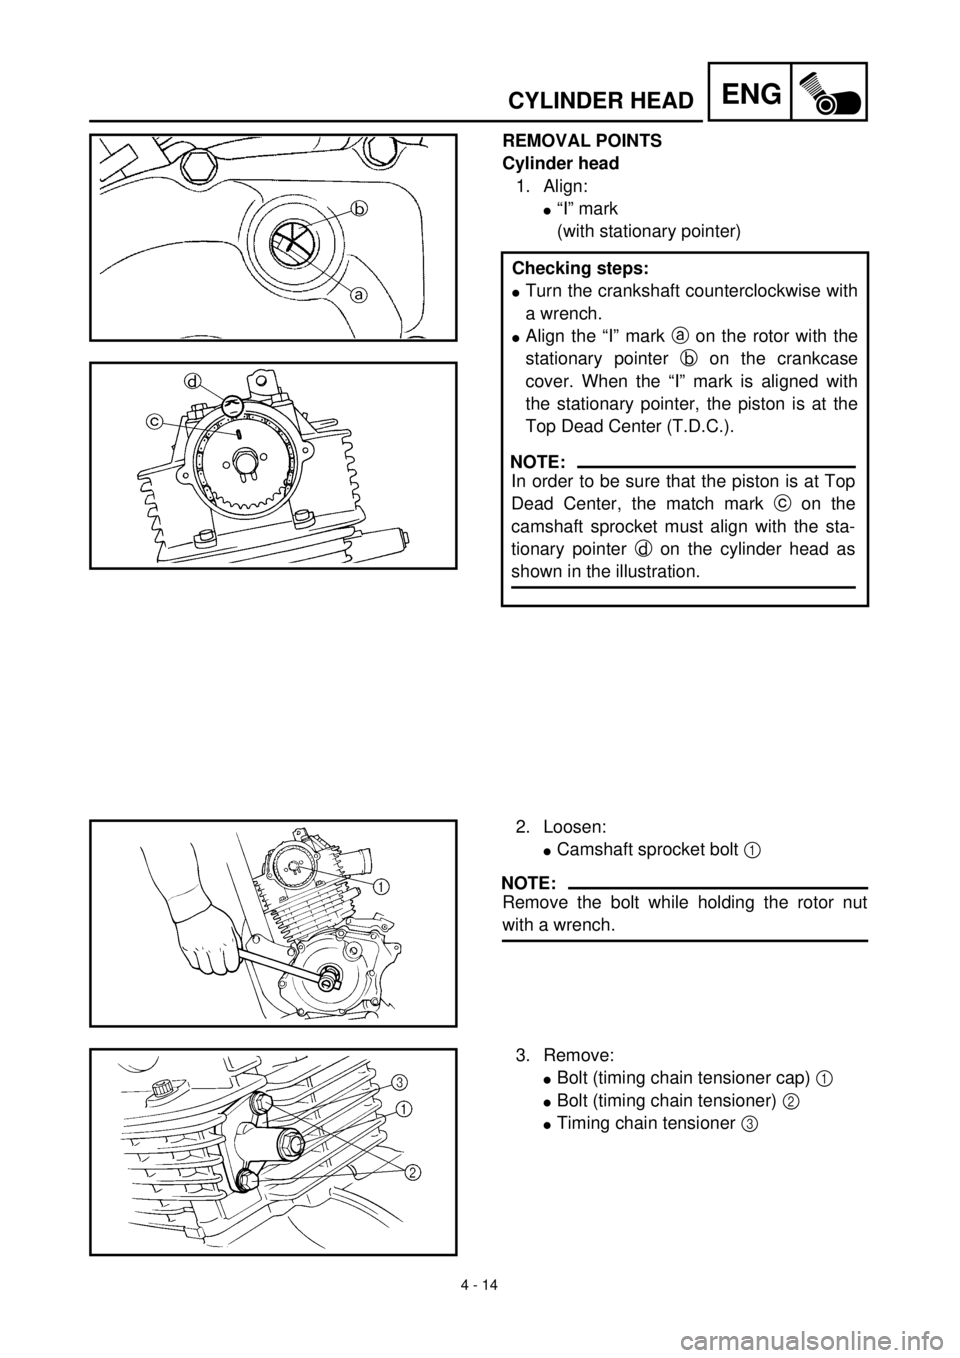 YAMAHA TTR125 2000  Notices Demploi (in French) 4 - 14
ENGCYLINDER HEAD
REMOVAL POINTS
Cylinder head
1. Align:
l“I” mark
(with stationary pointer)
Checking steps:
lTurn the crankshaft counterclockwise with
a wrench.
lAlign the “I” mark a on